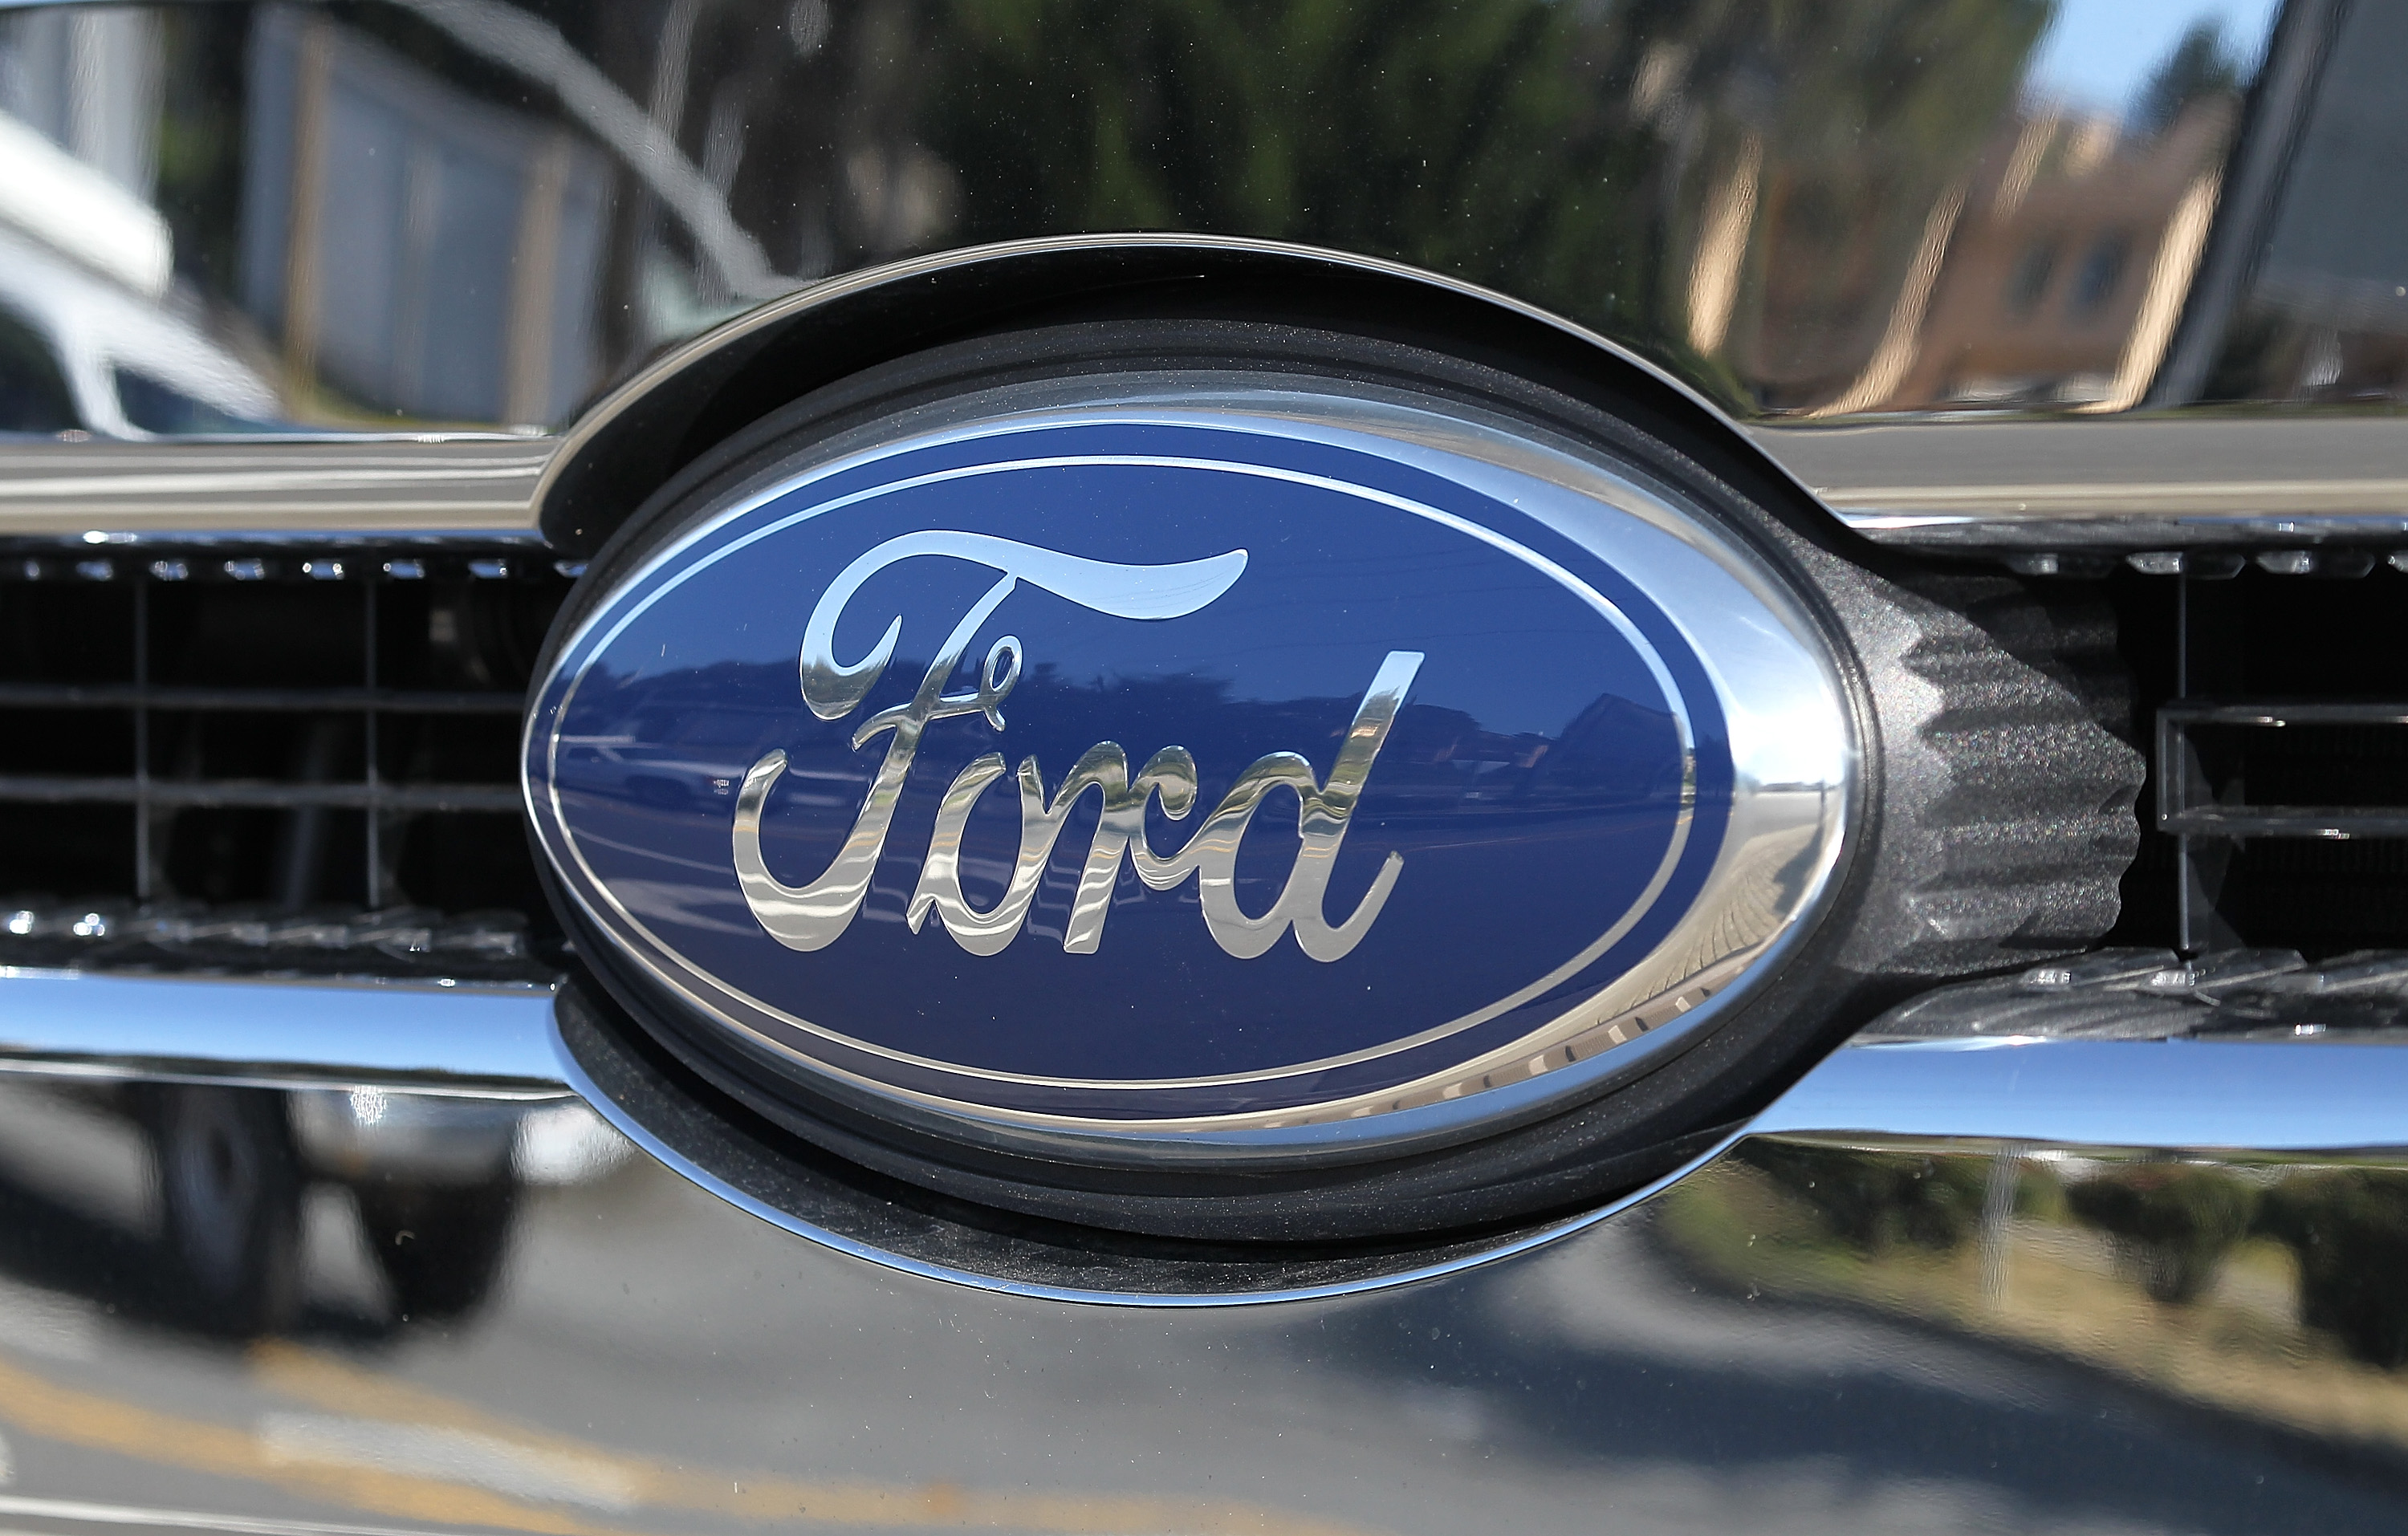 Ford Advising 39,000 Expedition And Navigator Owners To Park Outside Due To Fire Risk